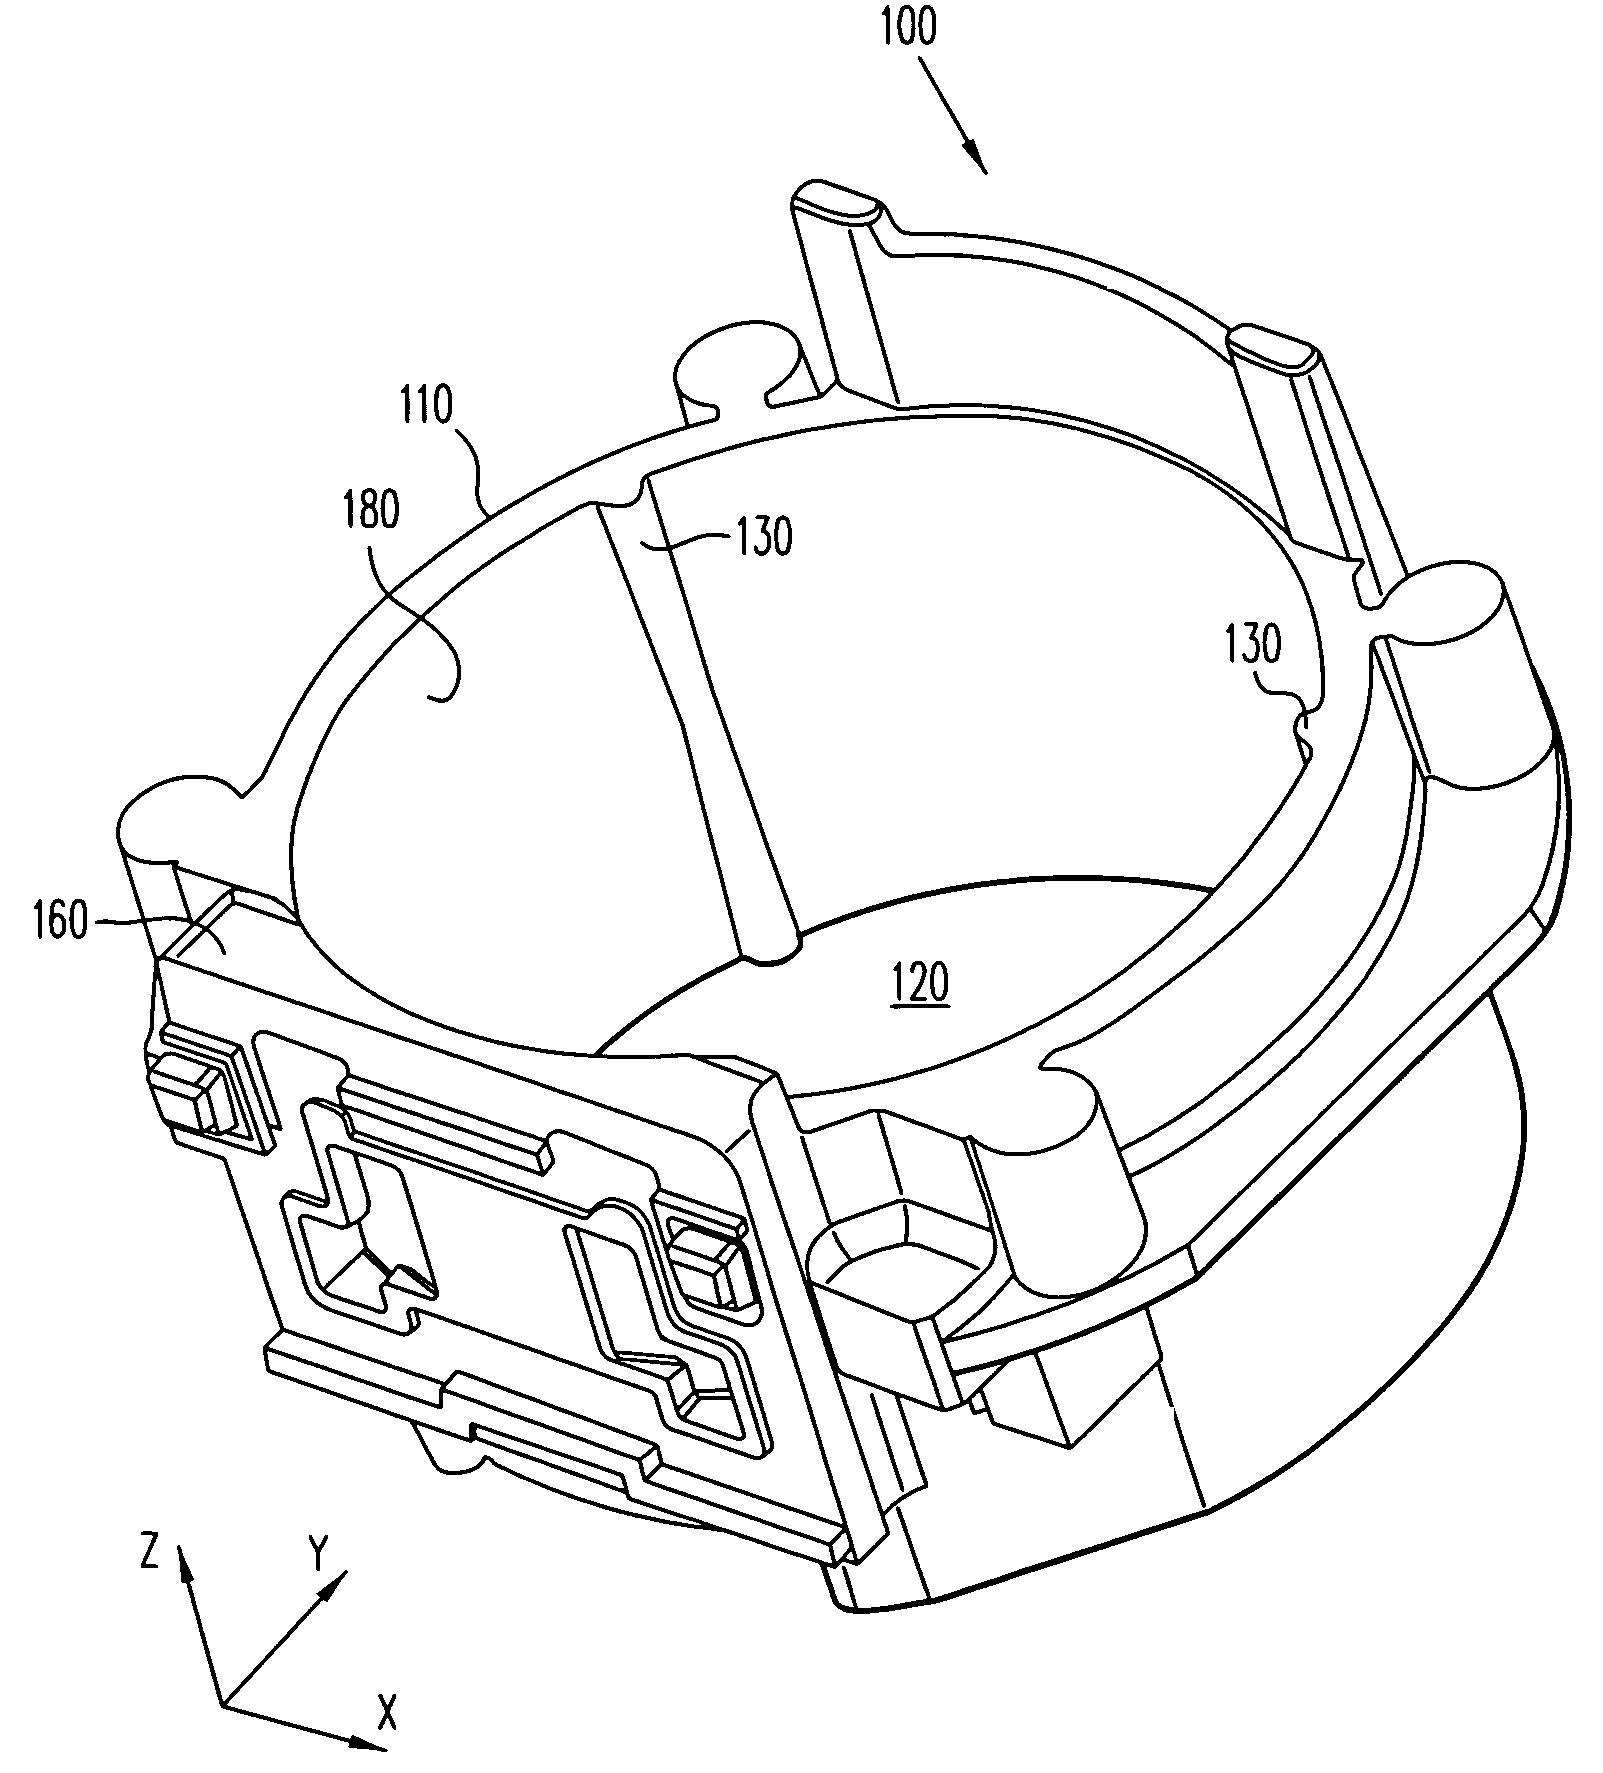 Lens positioning systems and methods